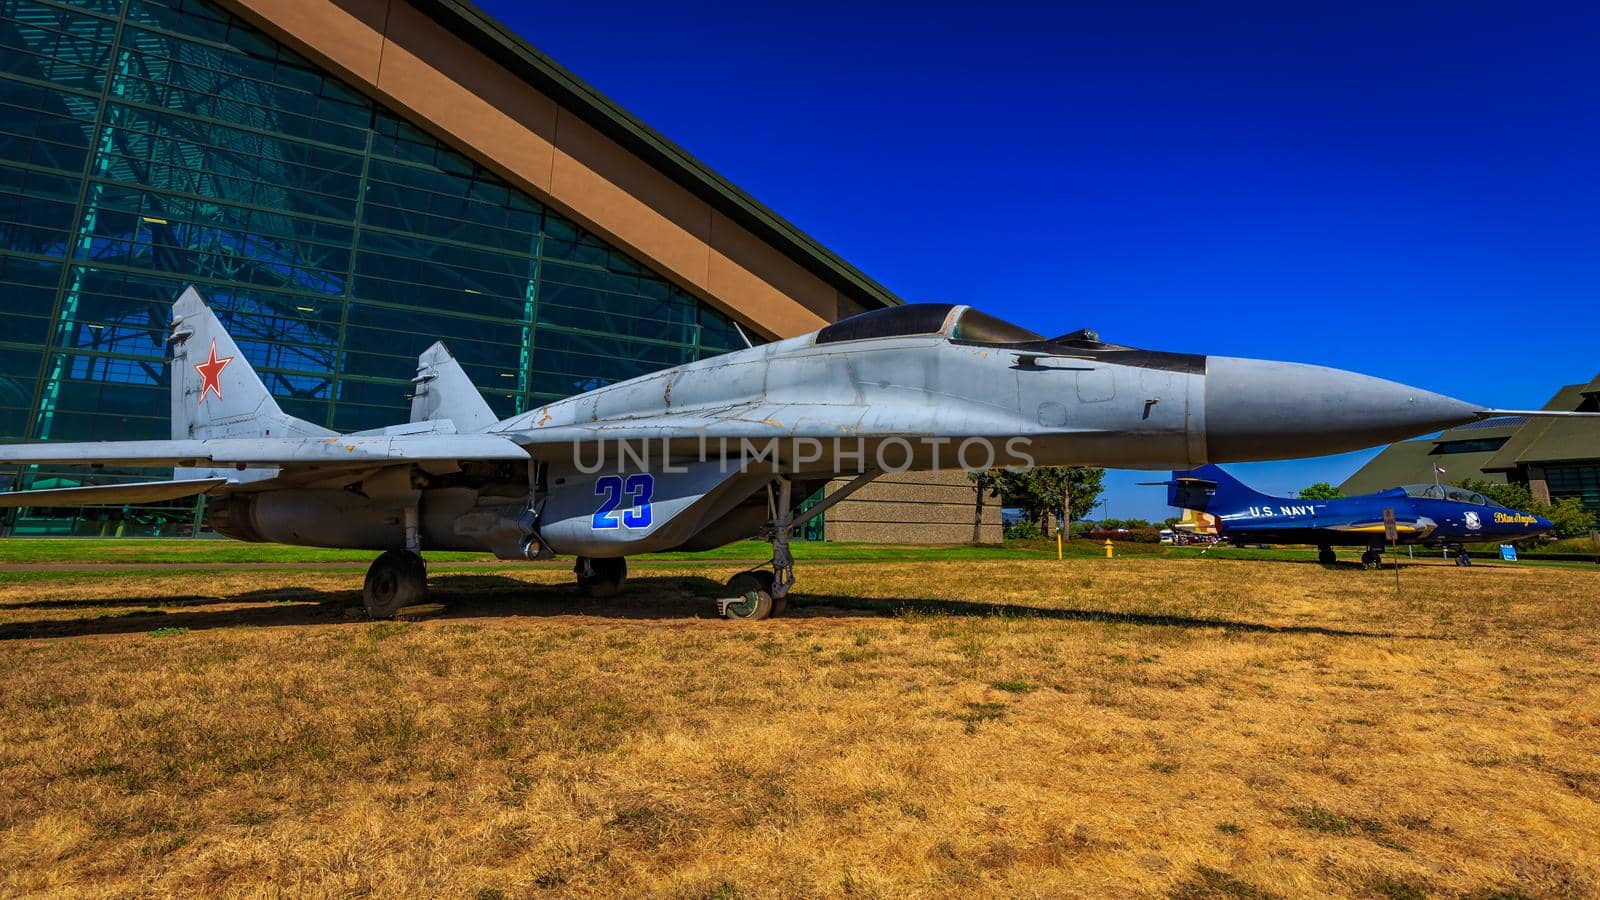 Aircraft Exhibition by gepeng